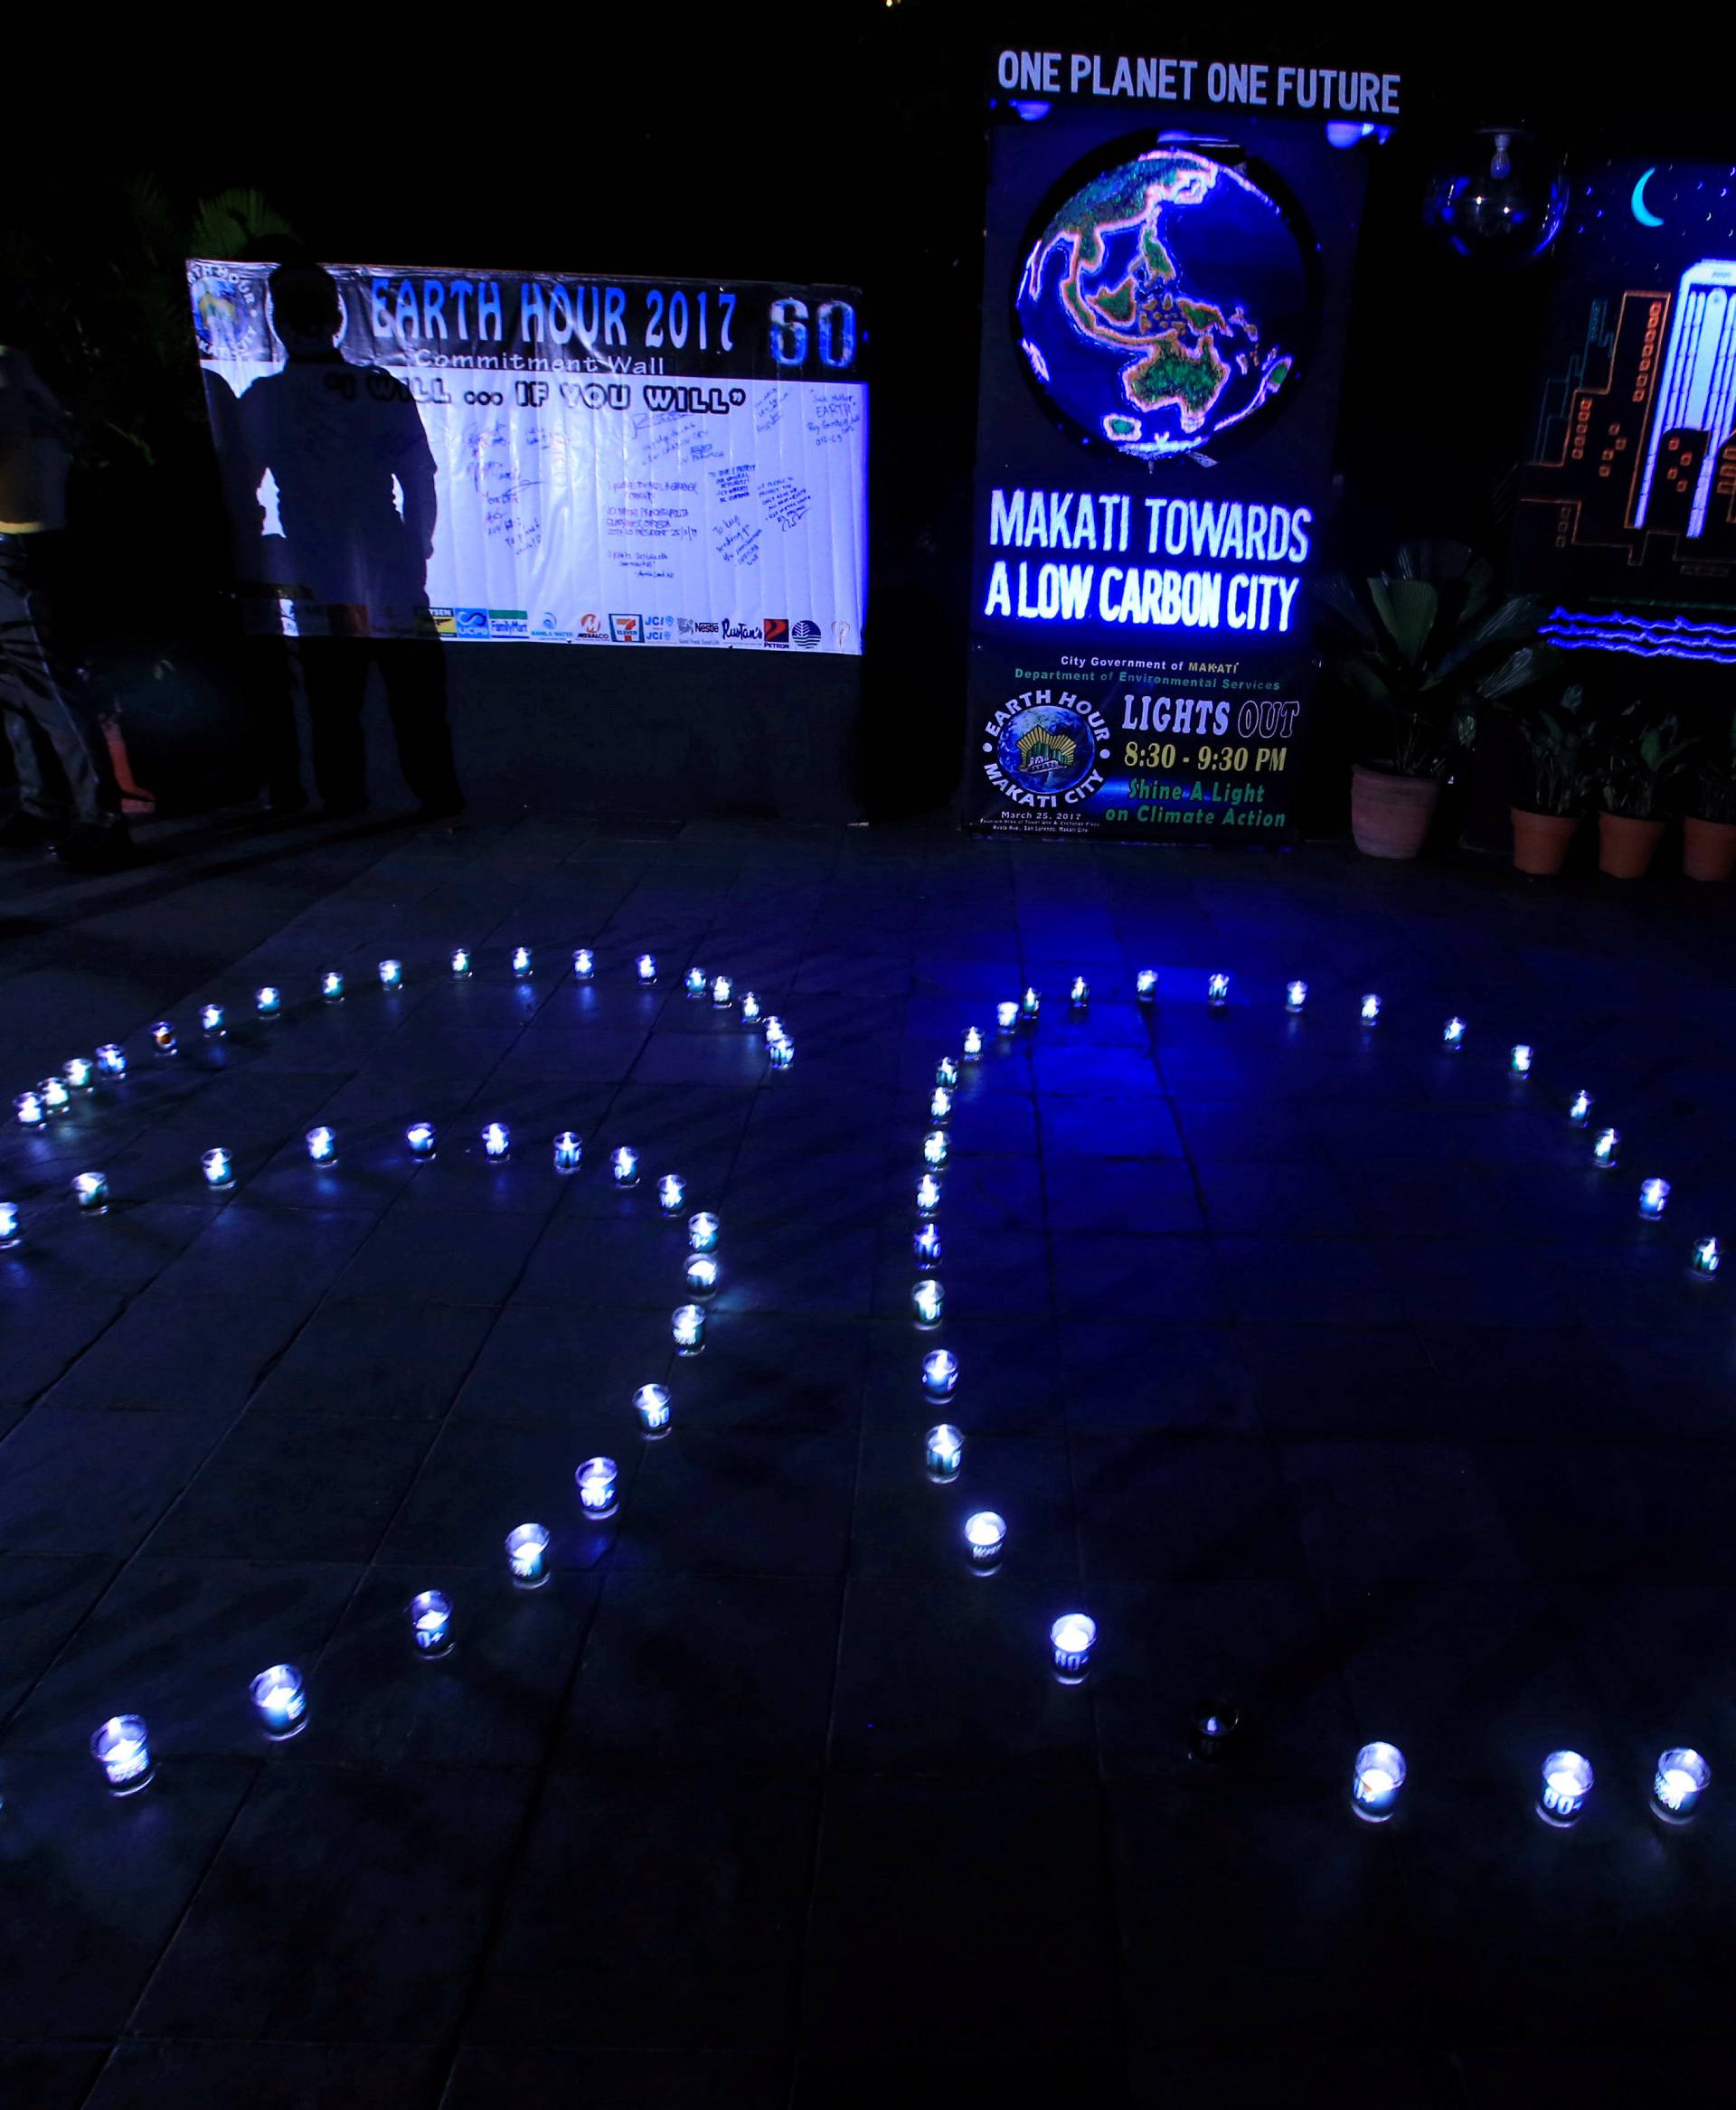 Glasses with lights lamps form the number 60, representing the 60 minutes of Earth Hour, during Earth Hour in Makati city, metro Manila